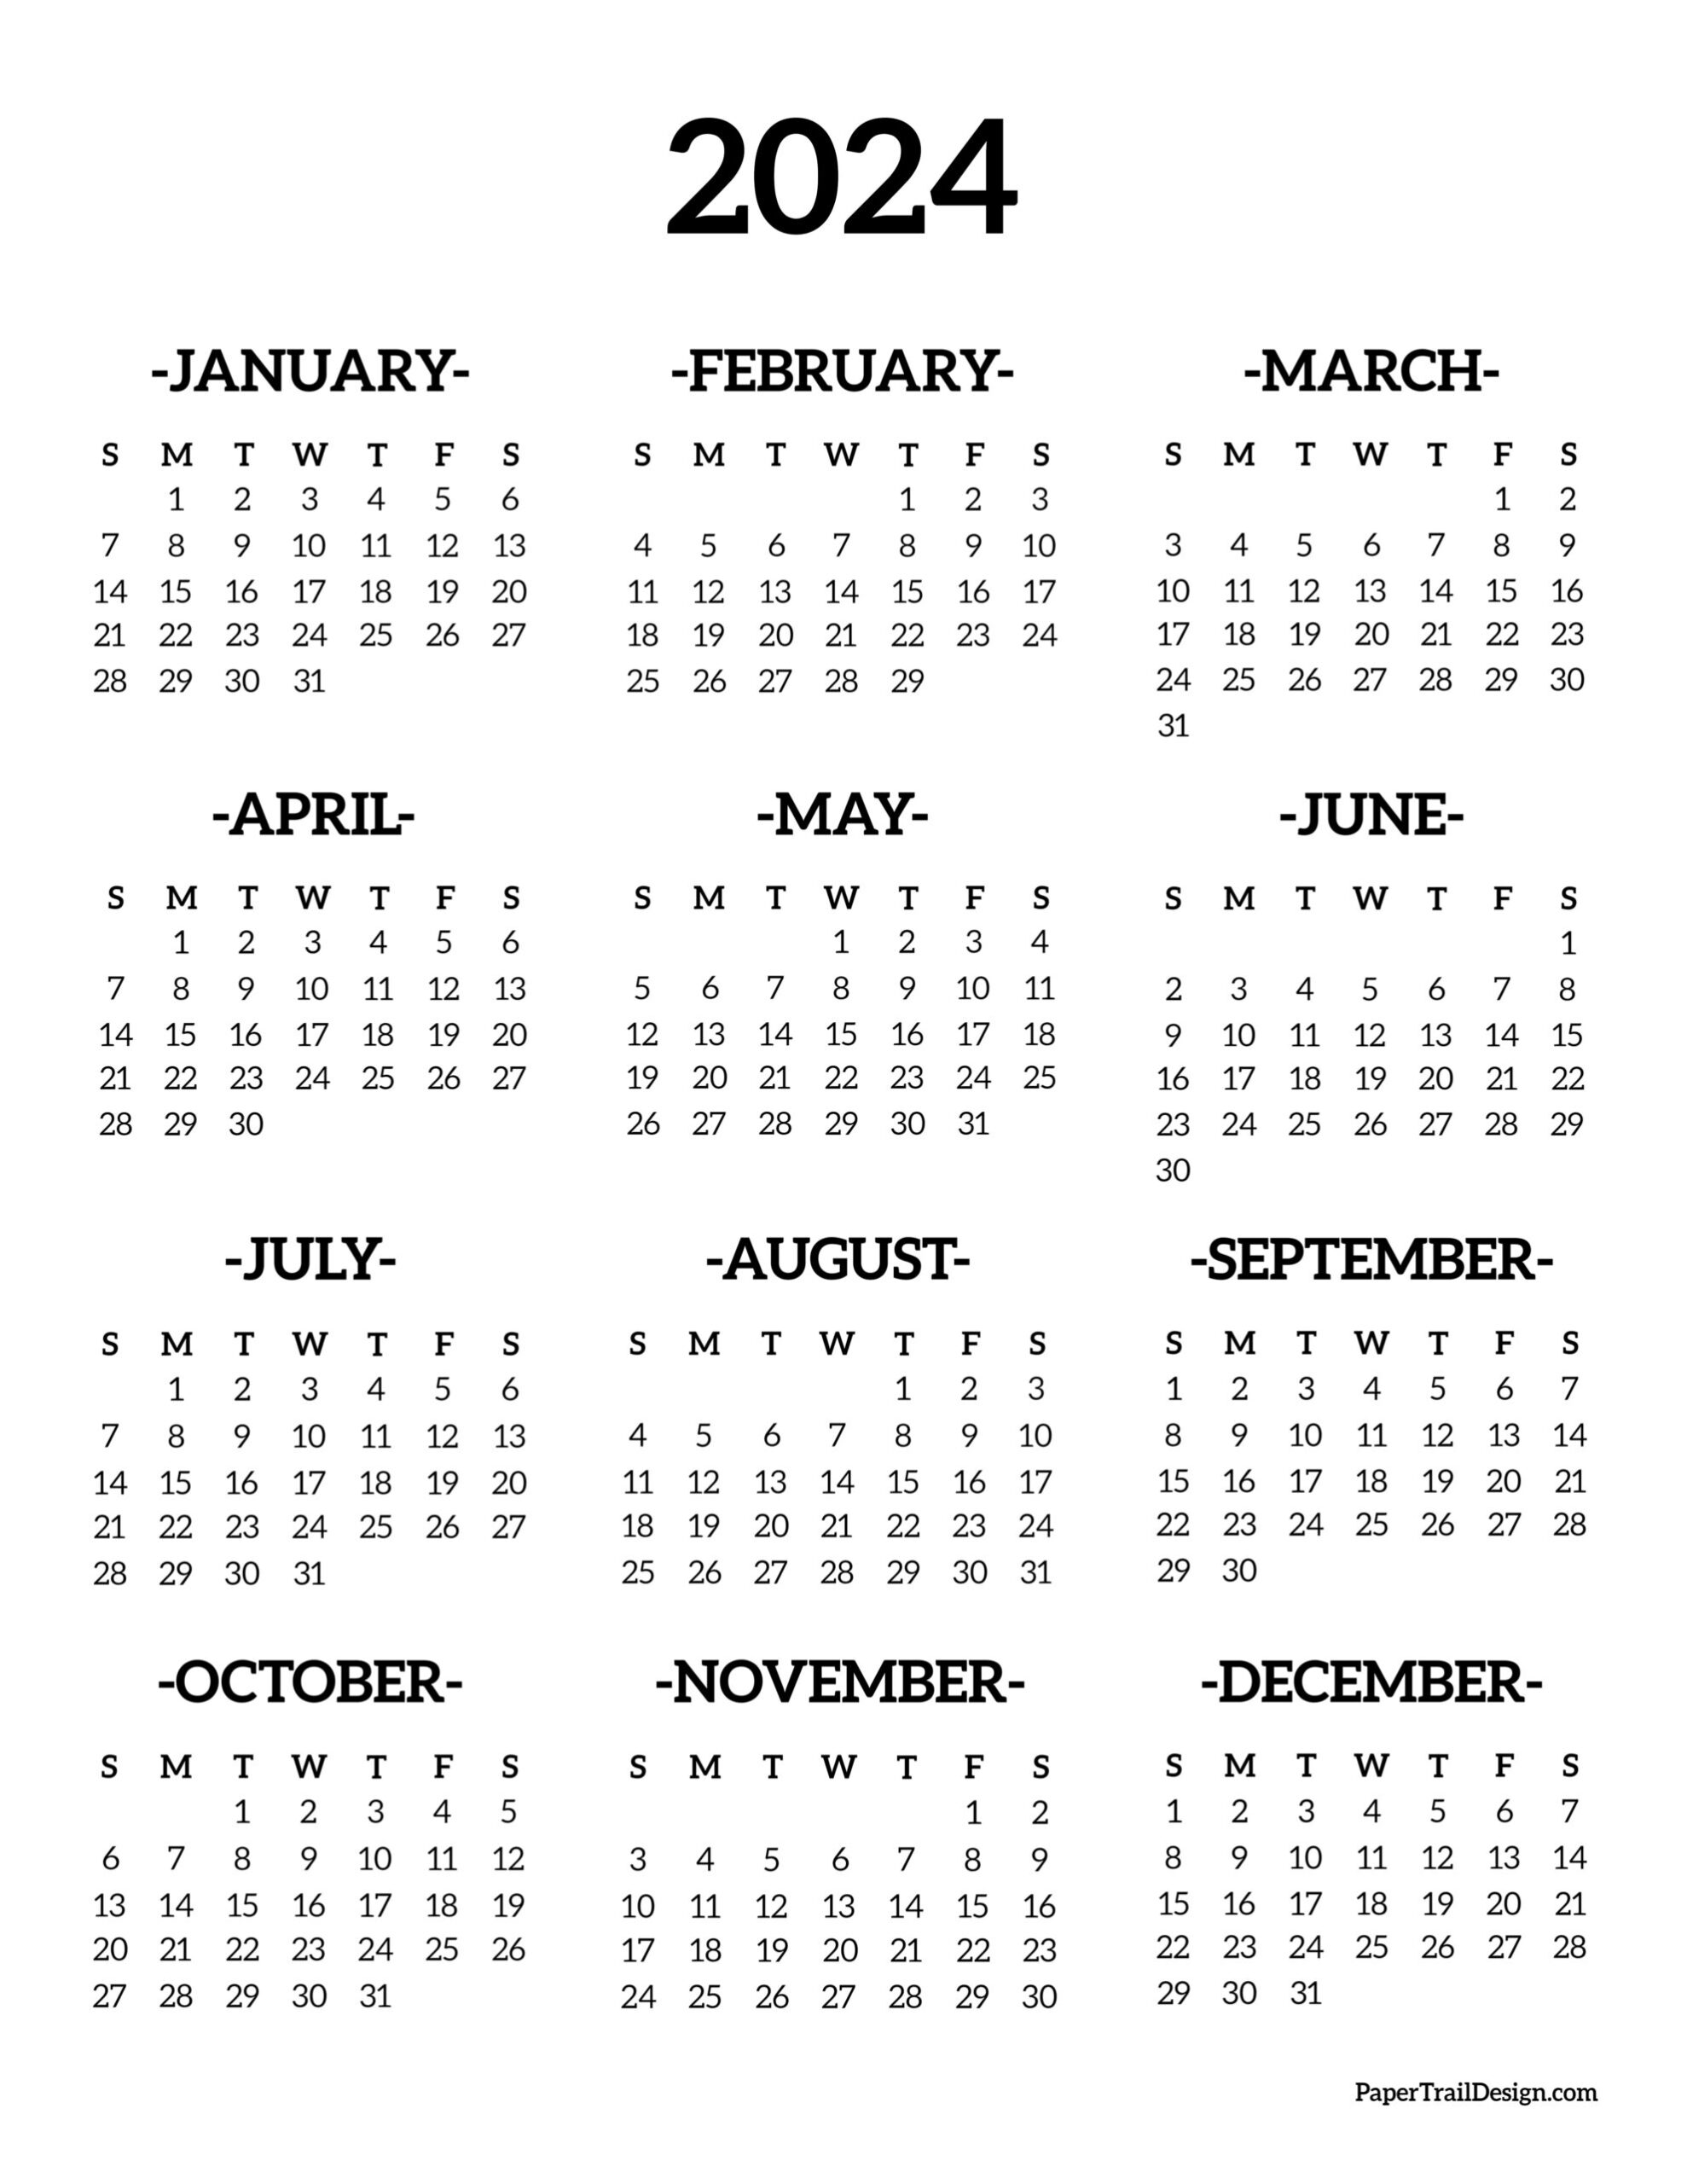 Calendar 2024 Printable One Page - Paper Trail Design for Free Printable Calendar Pages 2024